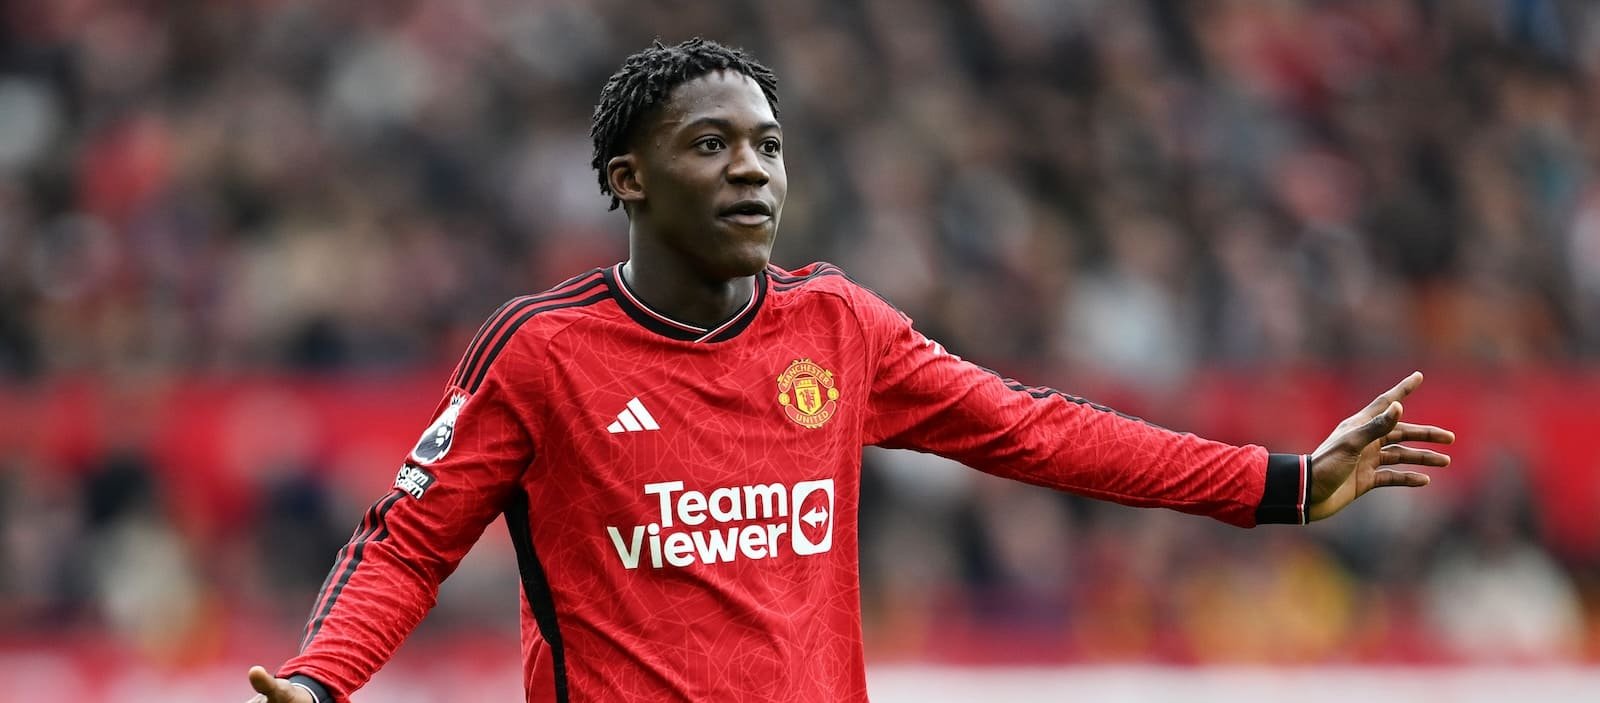 Manchester United midfeilder Kobbie Mainoo nominated for the Premier League's Young Player of the Season award - Man United News And Transfer News